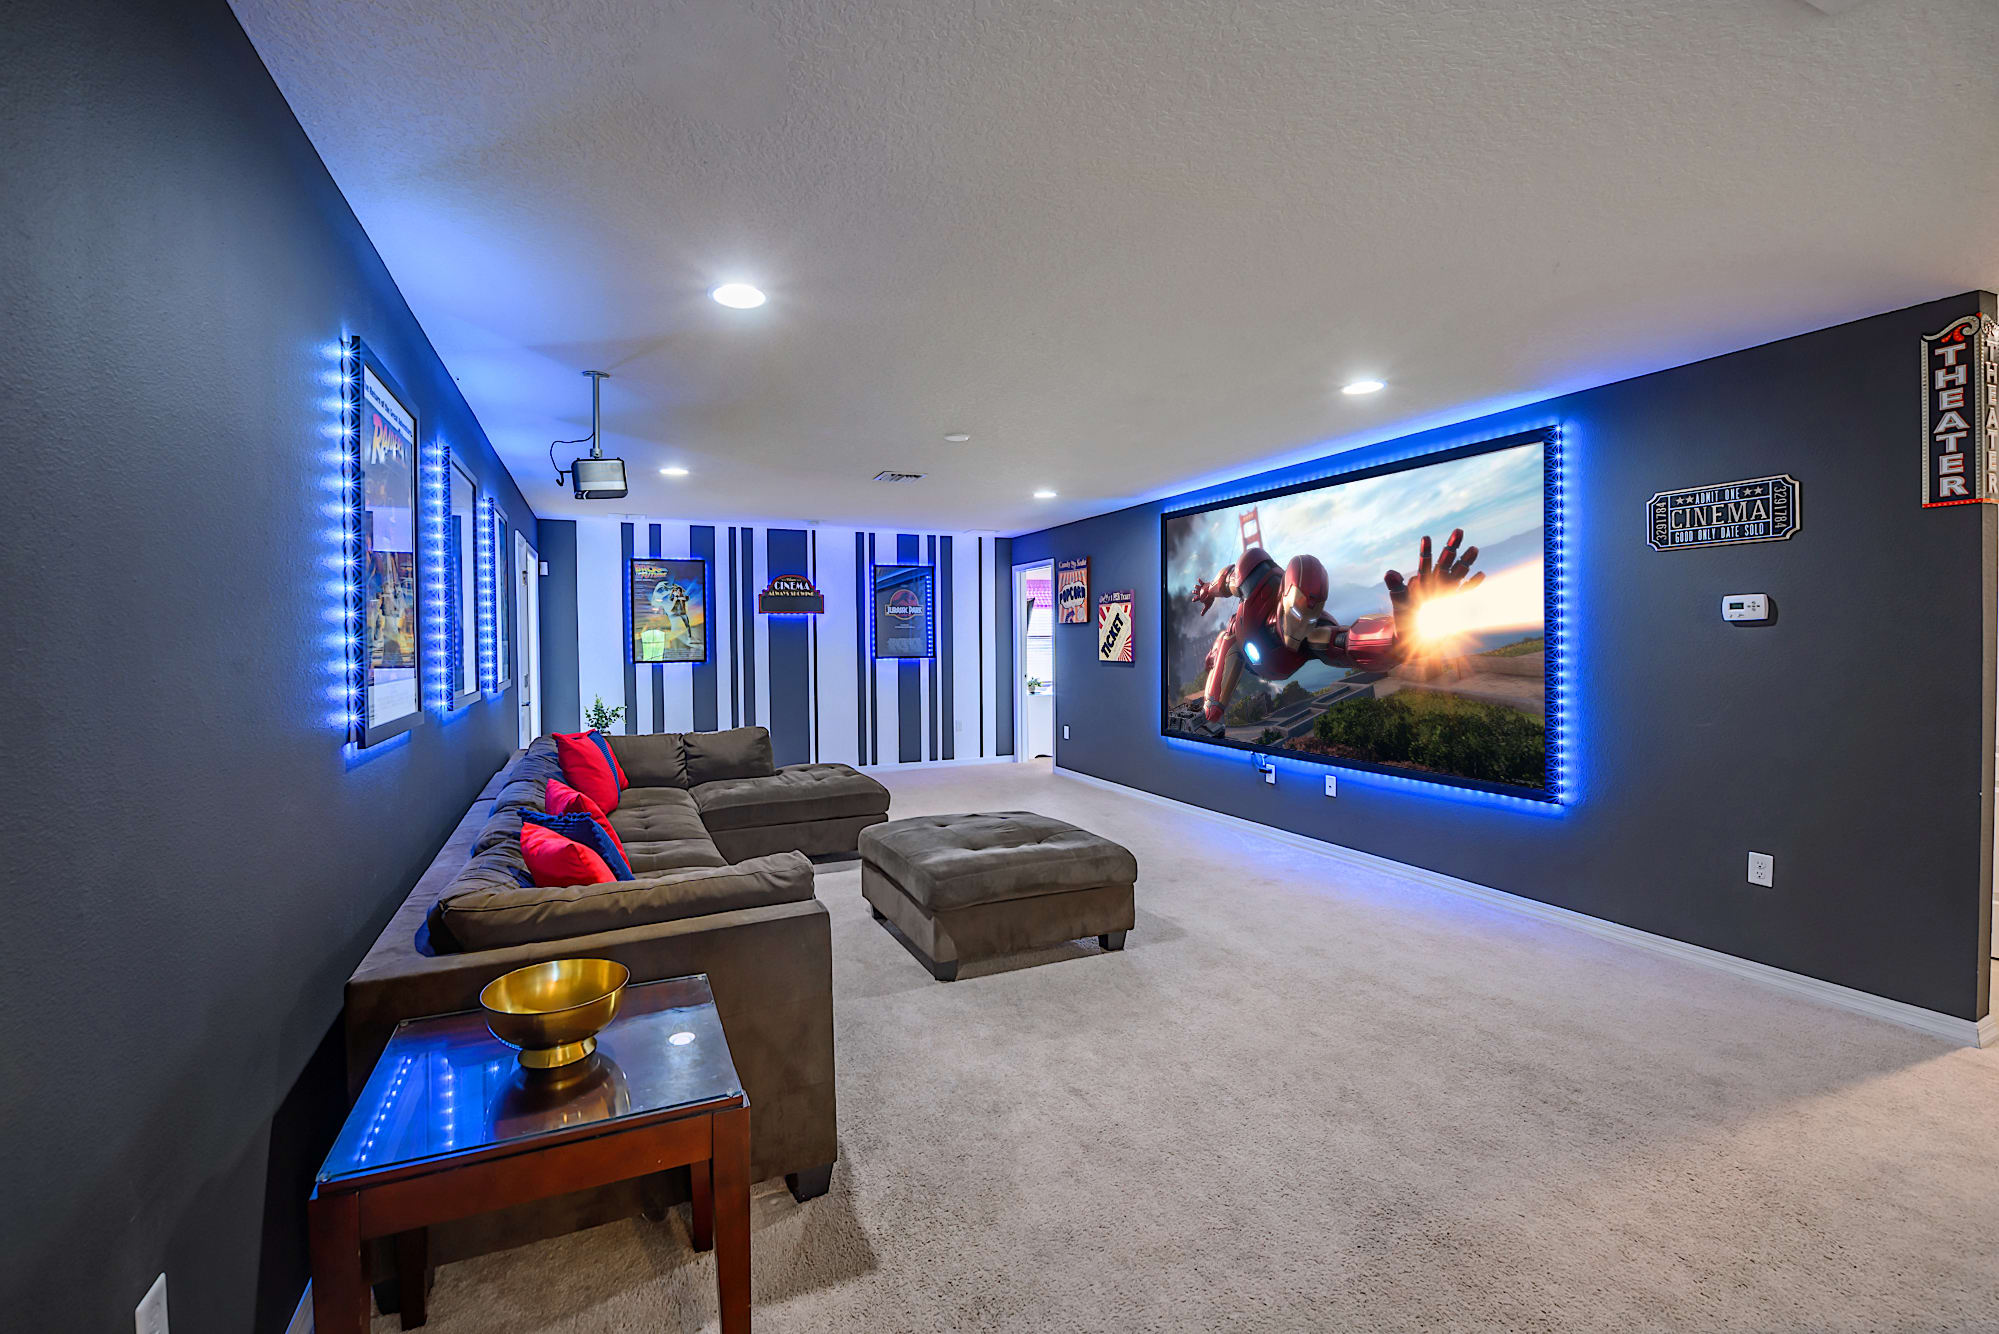 8BR Family Resort Home Games Room Cool Theater Photo